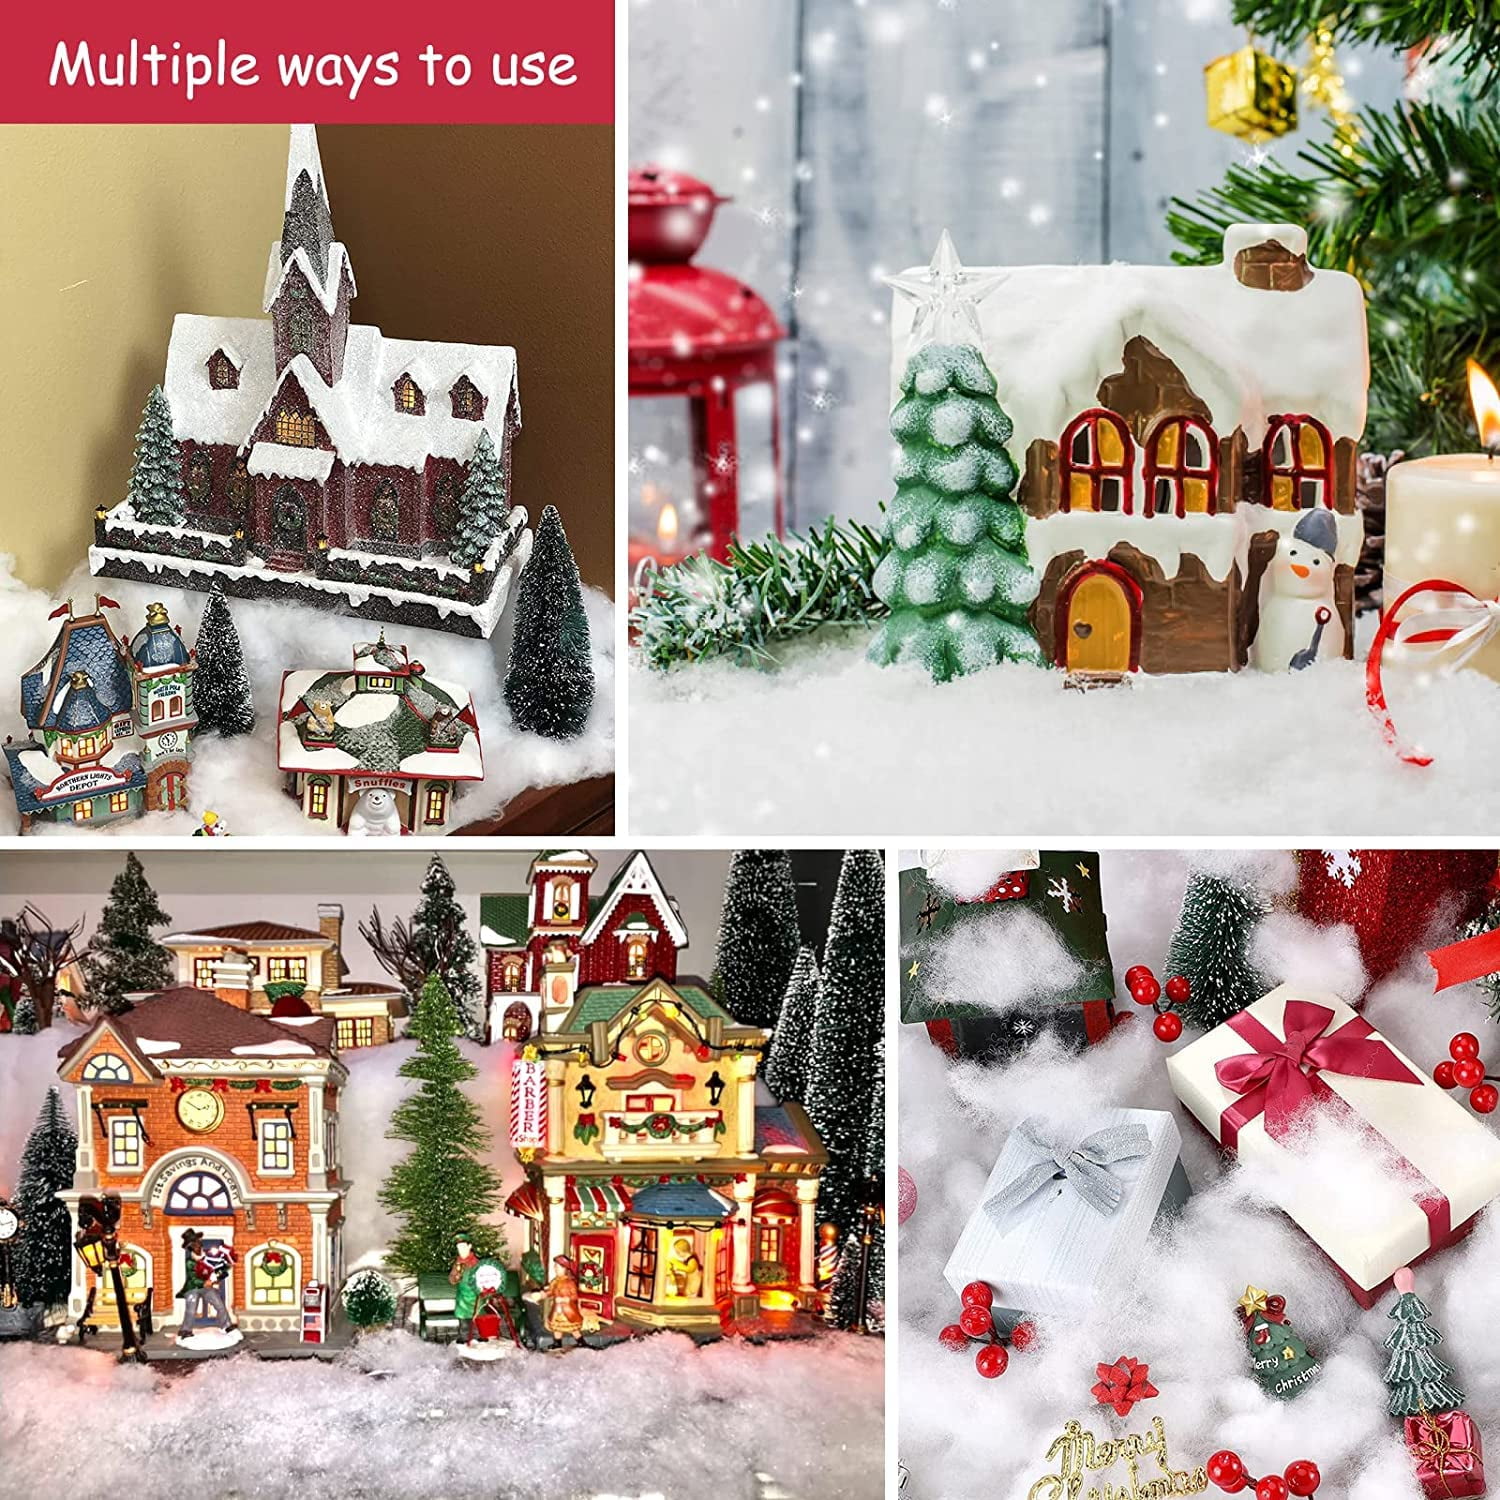 Christmas Fake Snow Decor, Fluffy Fiber Artificial Snow Indoor White Fakes  Snow Decoration for Christmas Tree Flocking Village Crafts Winter